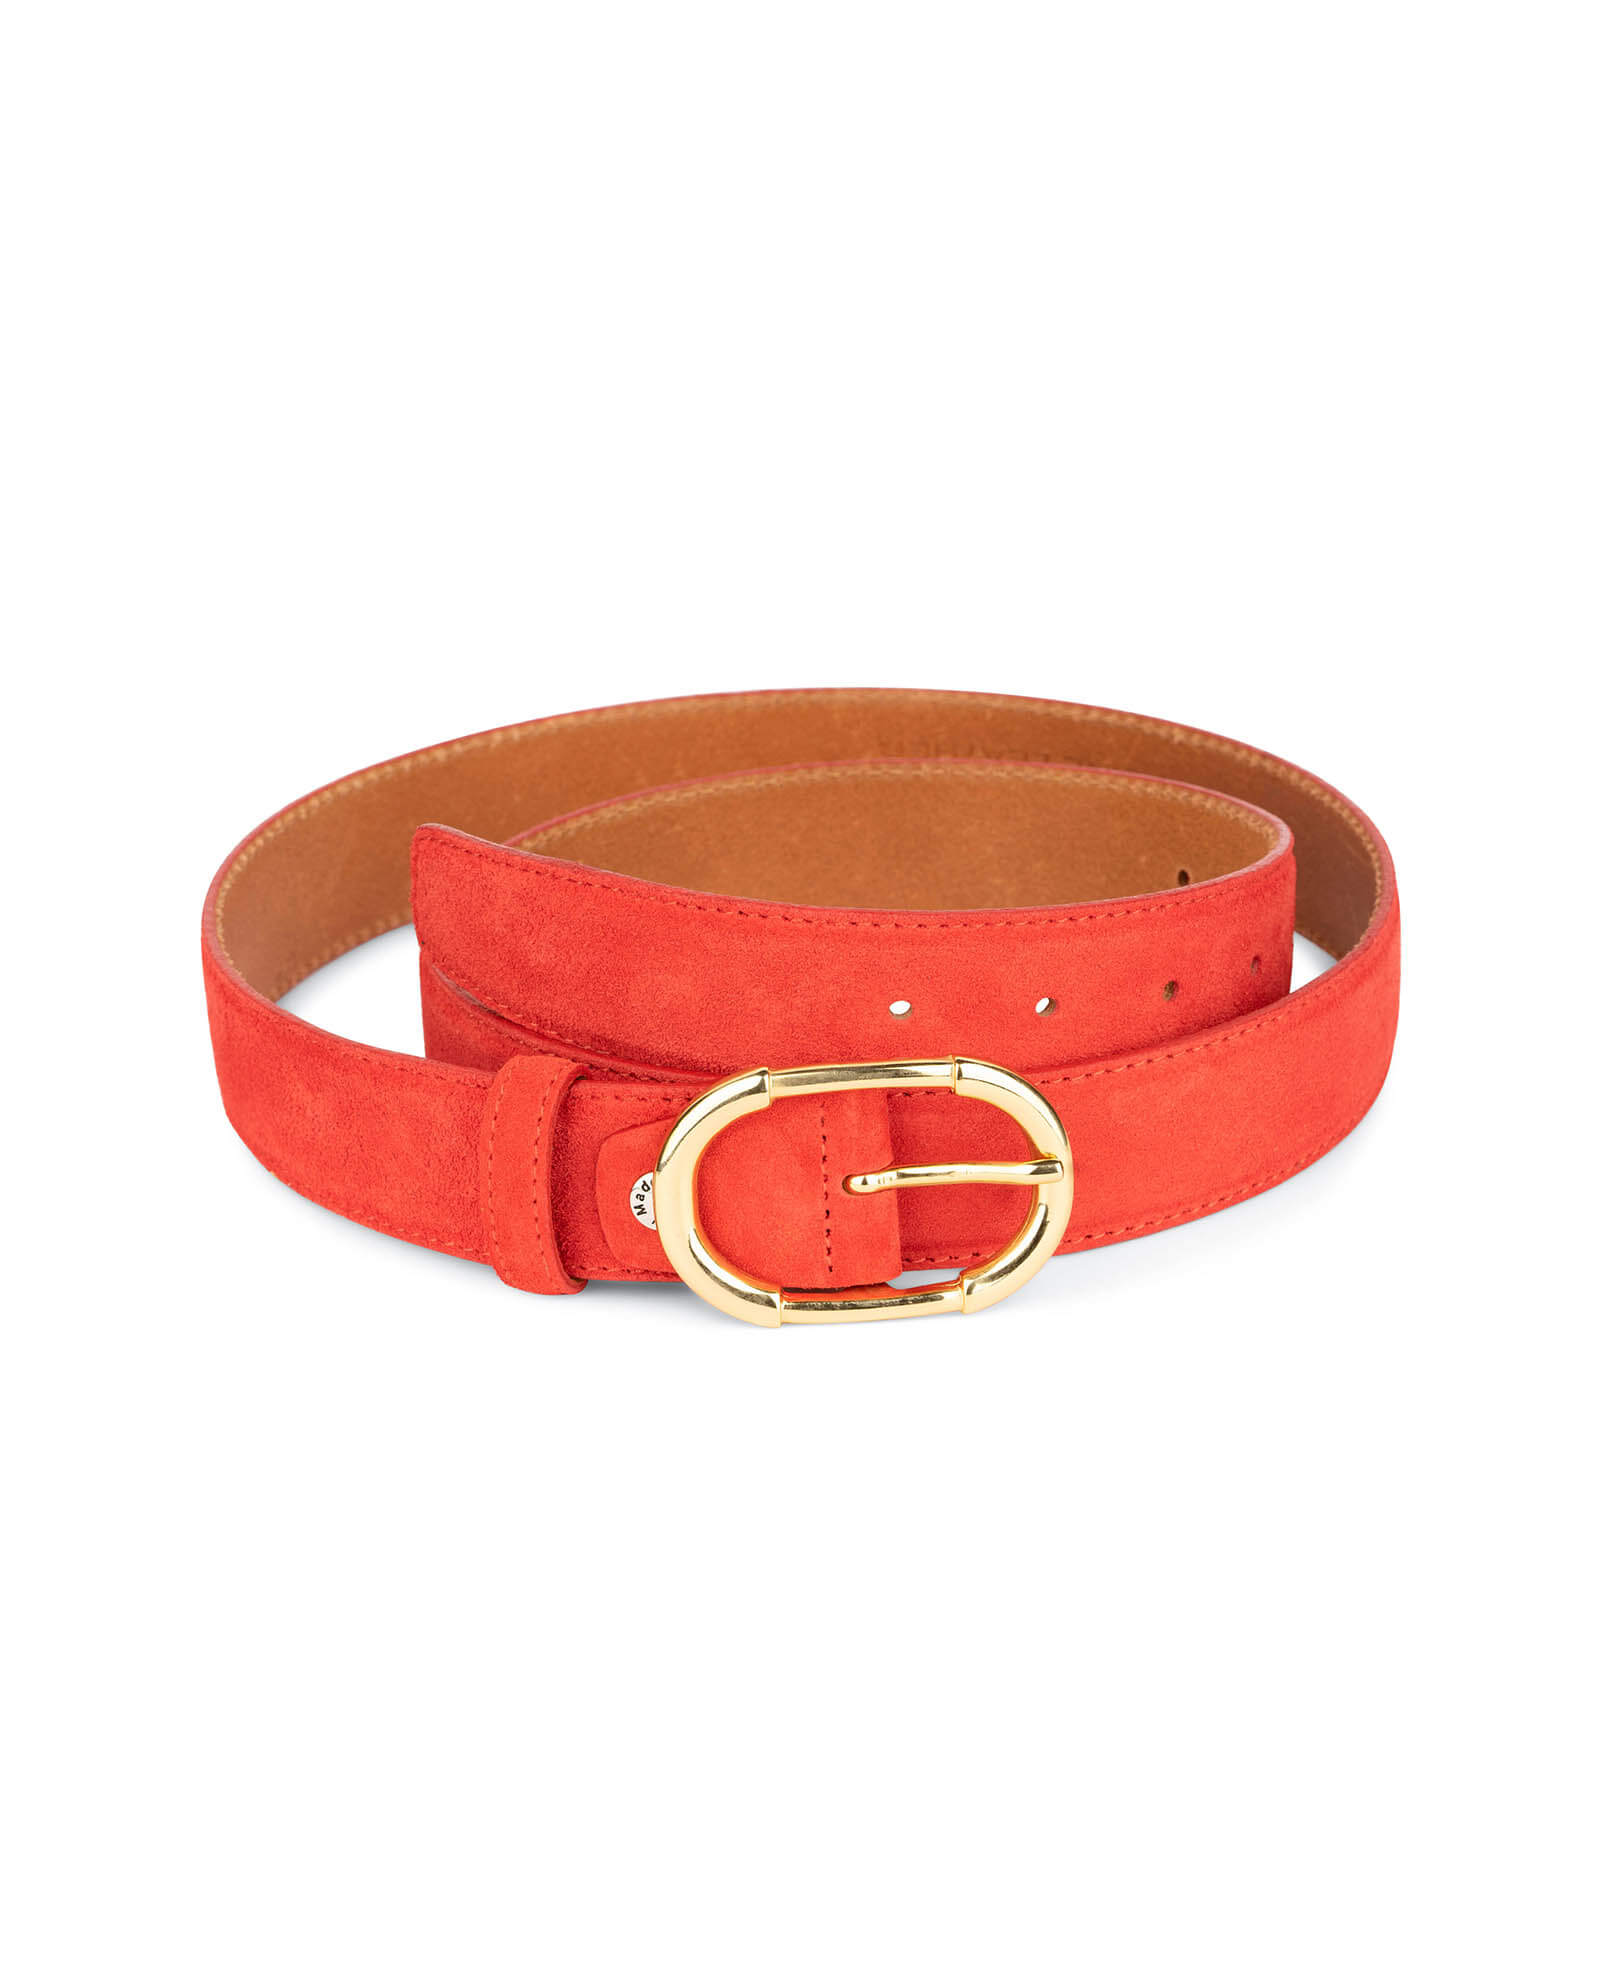 Buy Womens Red Suede Leather Belt With Gold Buckle | LeatherBelts